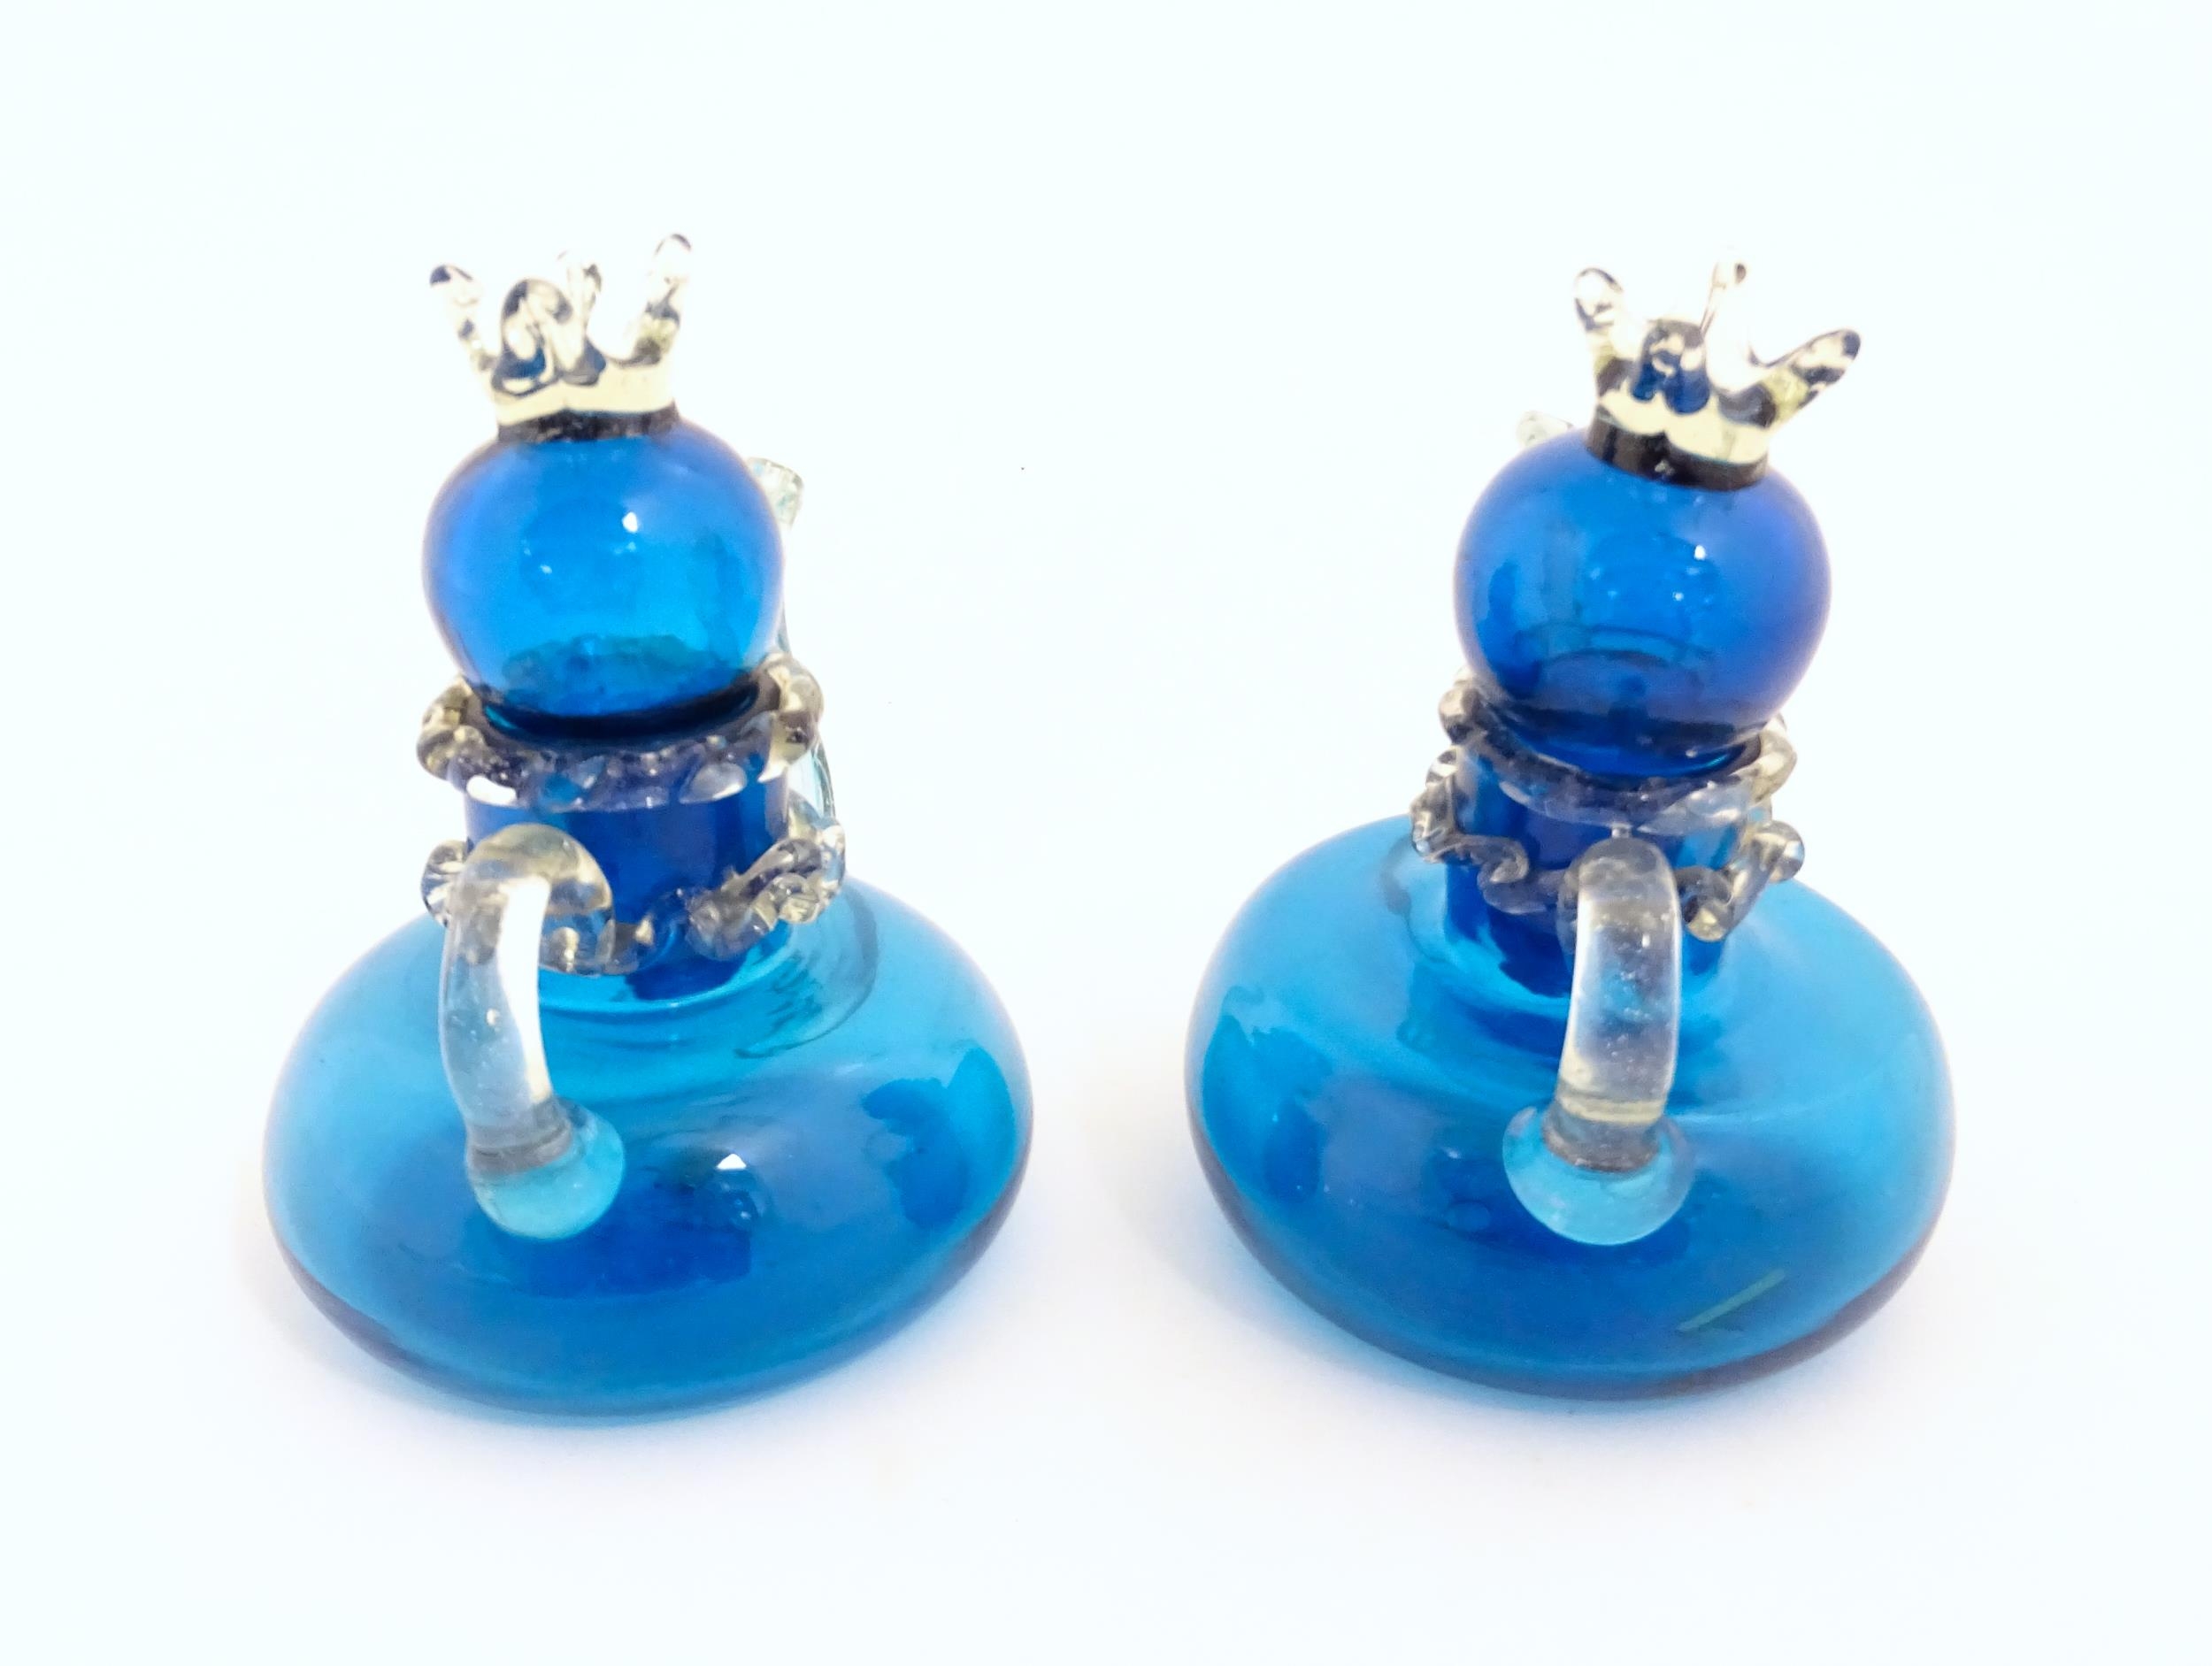 An unusual pair of turquoise glass oil / vinegar bottles of teapot form, the lids surmounted by - Image 10 of 11